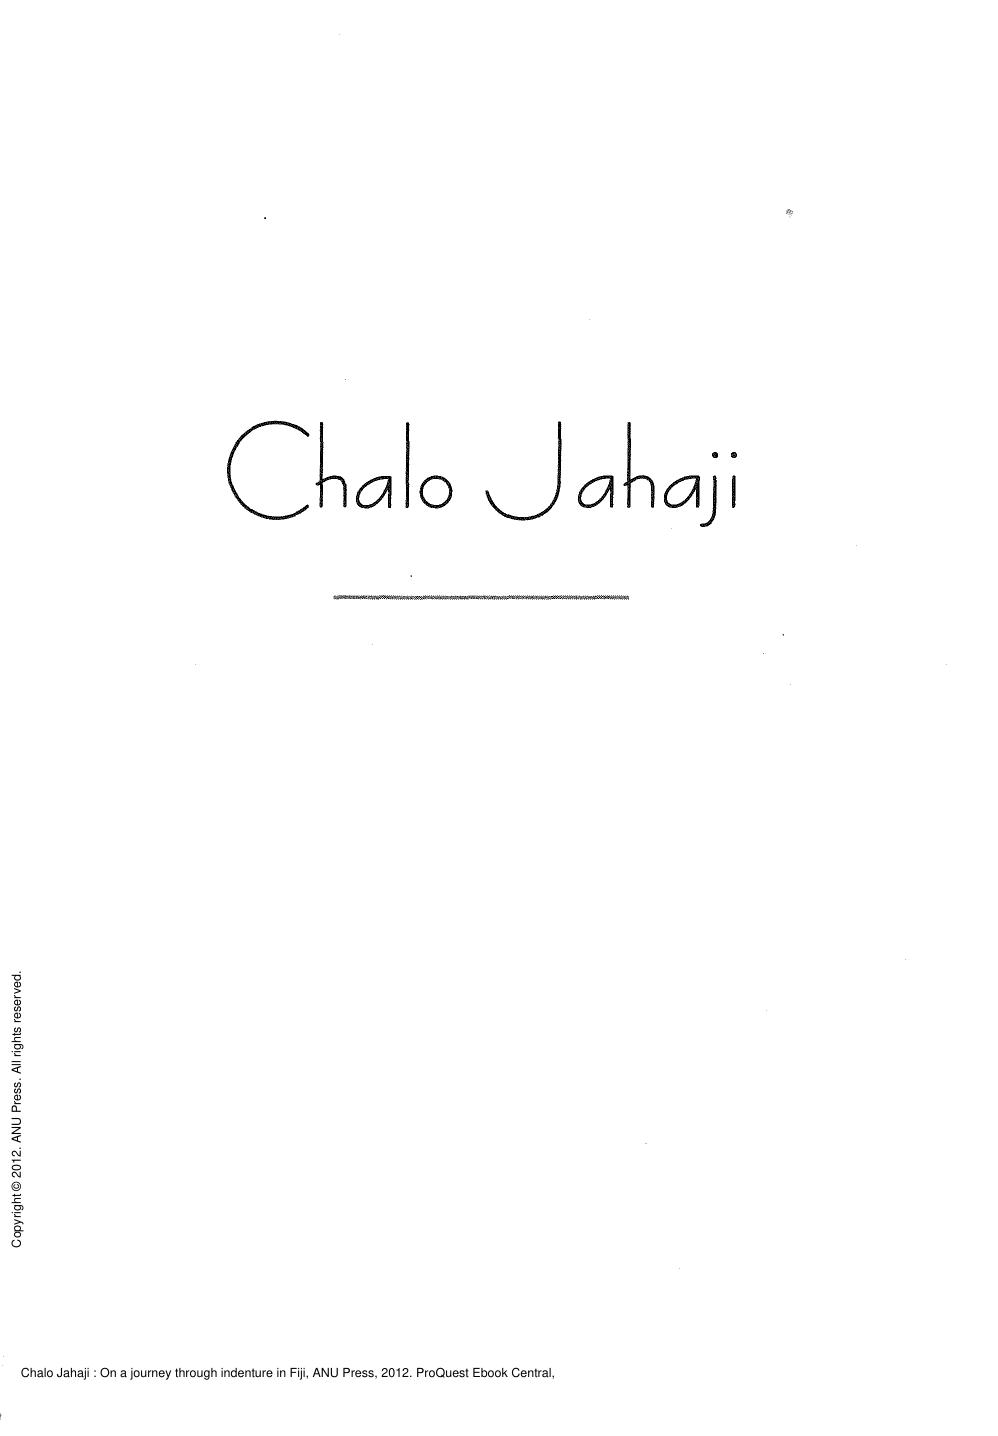 Chalo Jahaji: On a journey through indenture in Fiji by Brij V. Lal